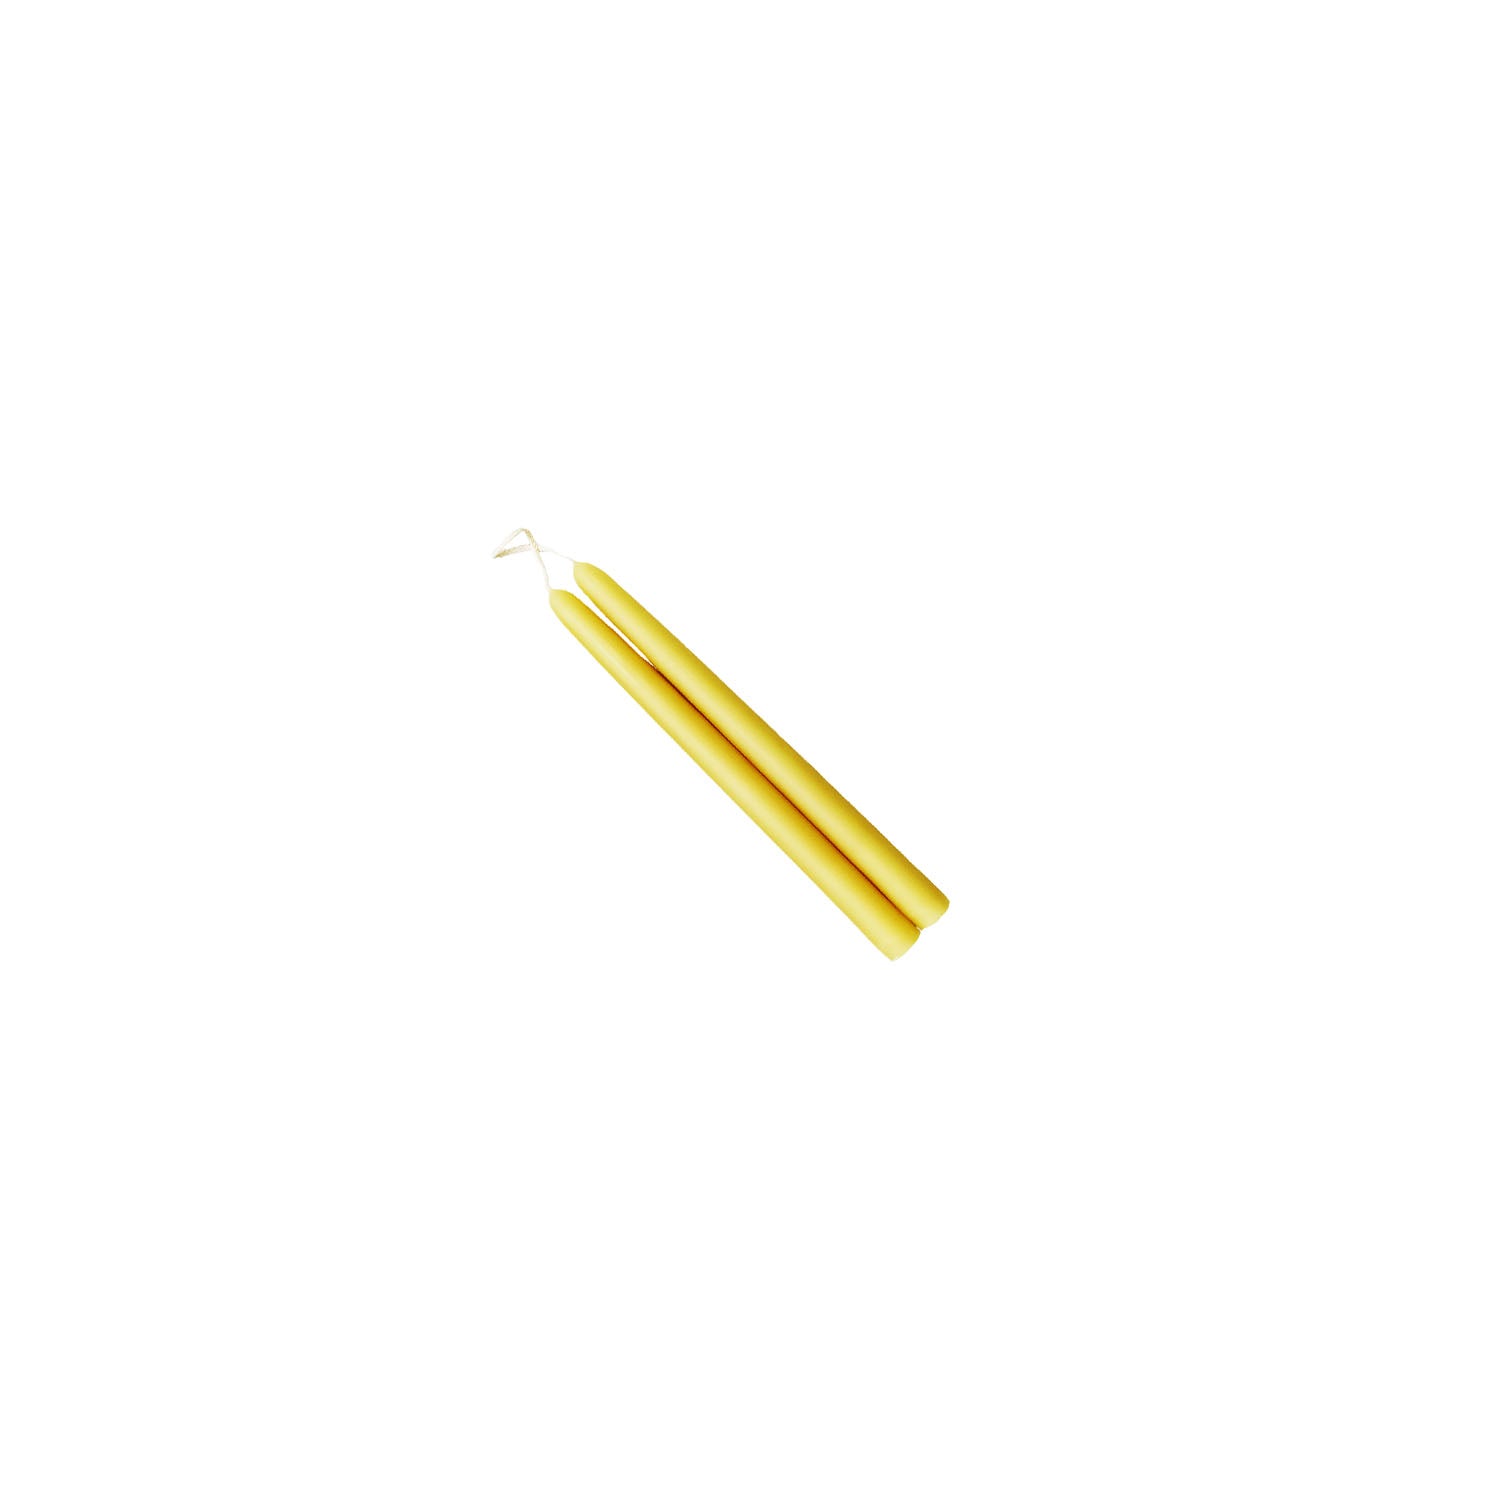 10 inch Beeswax Taper Pair - Beeswax Candles - Mole Hollow Candles